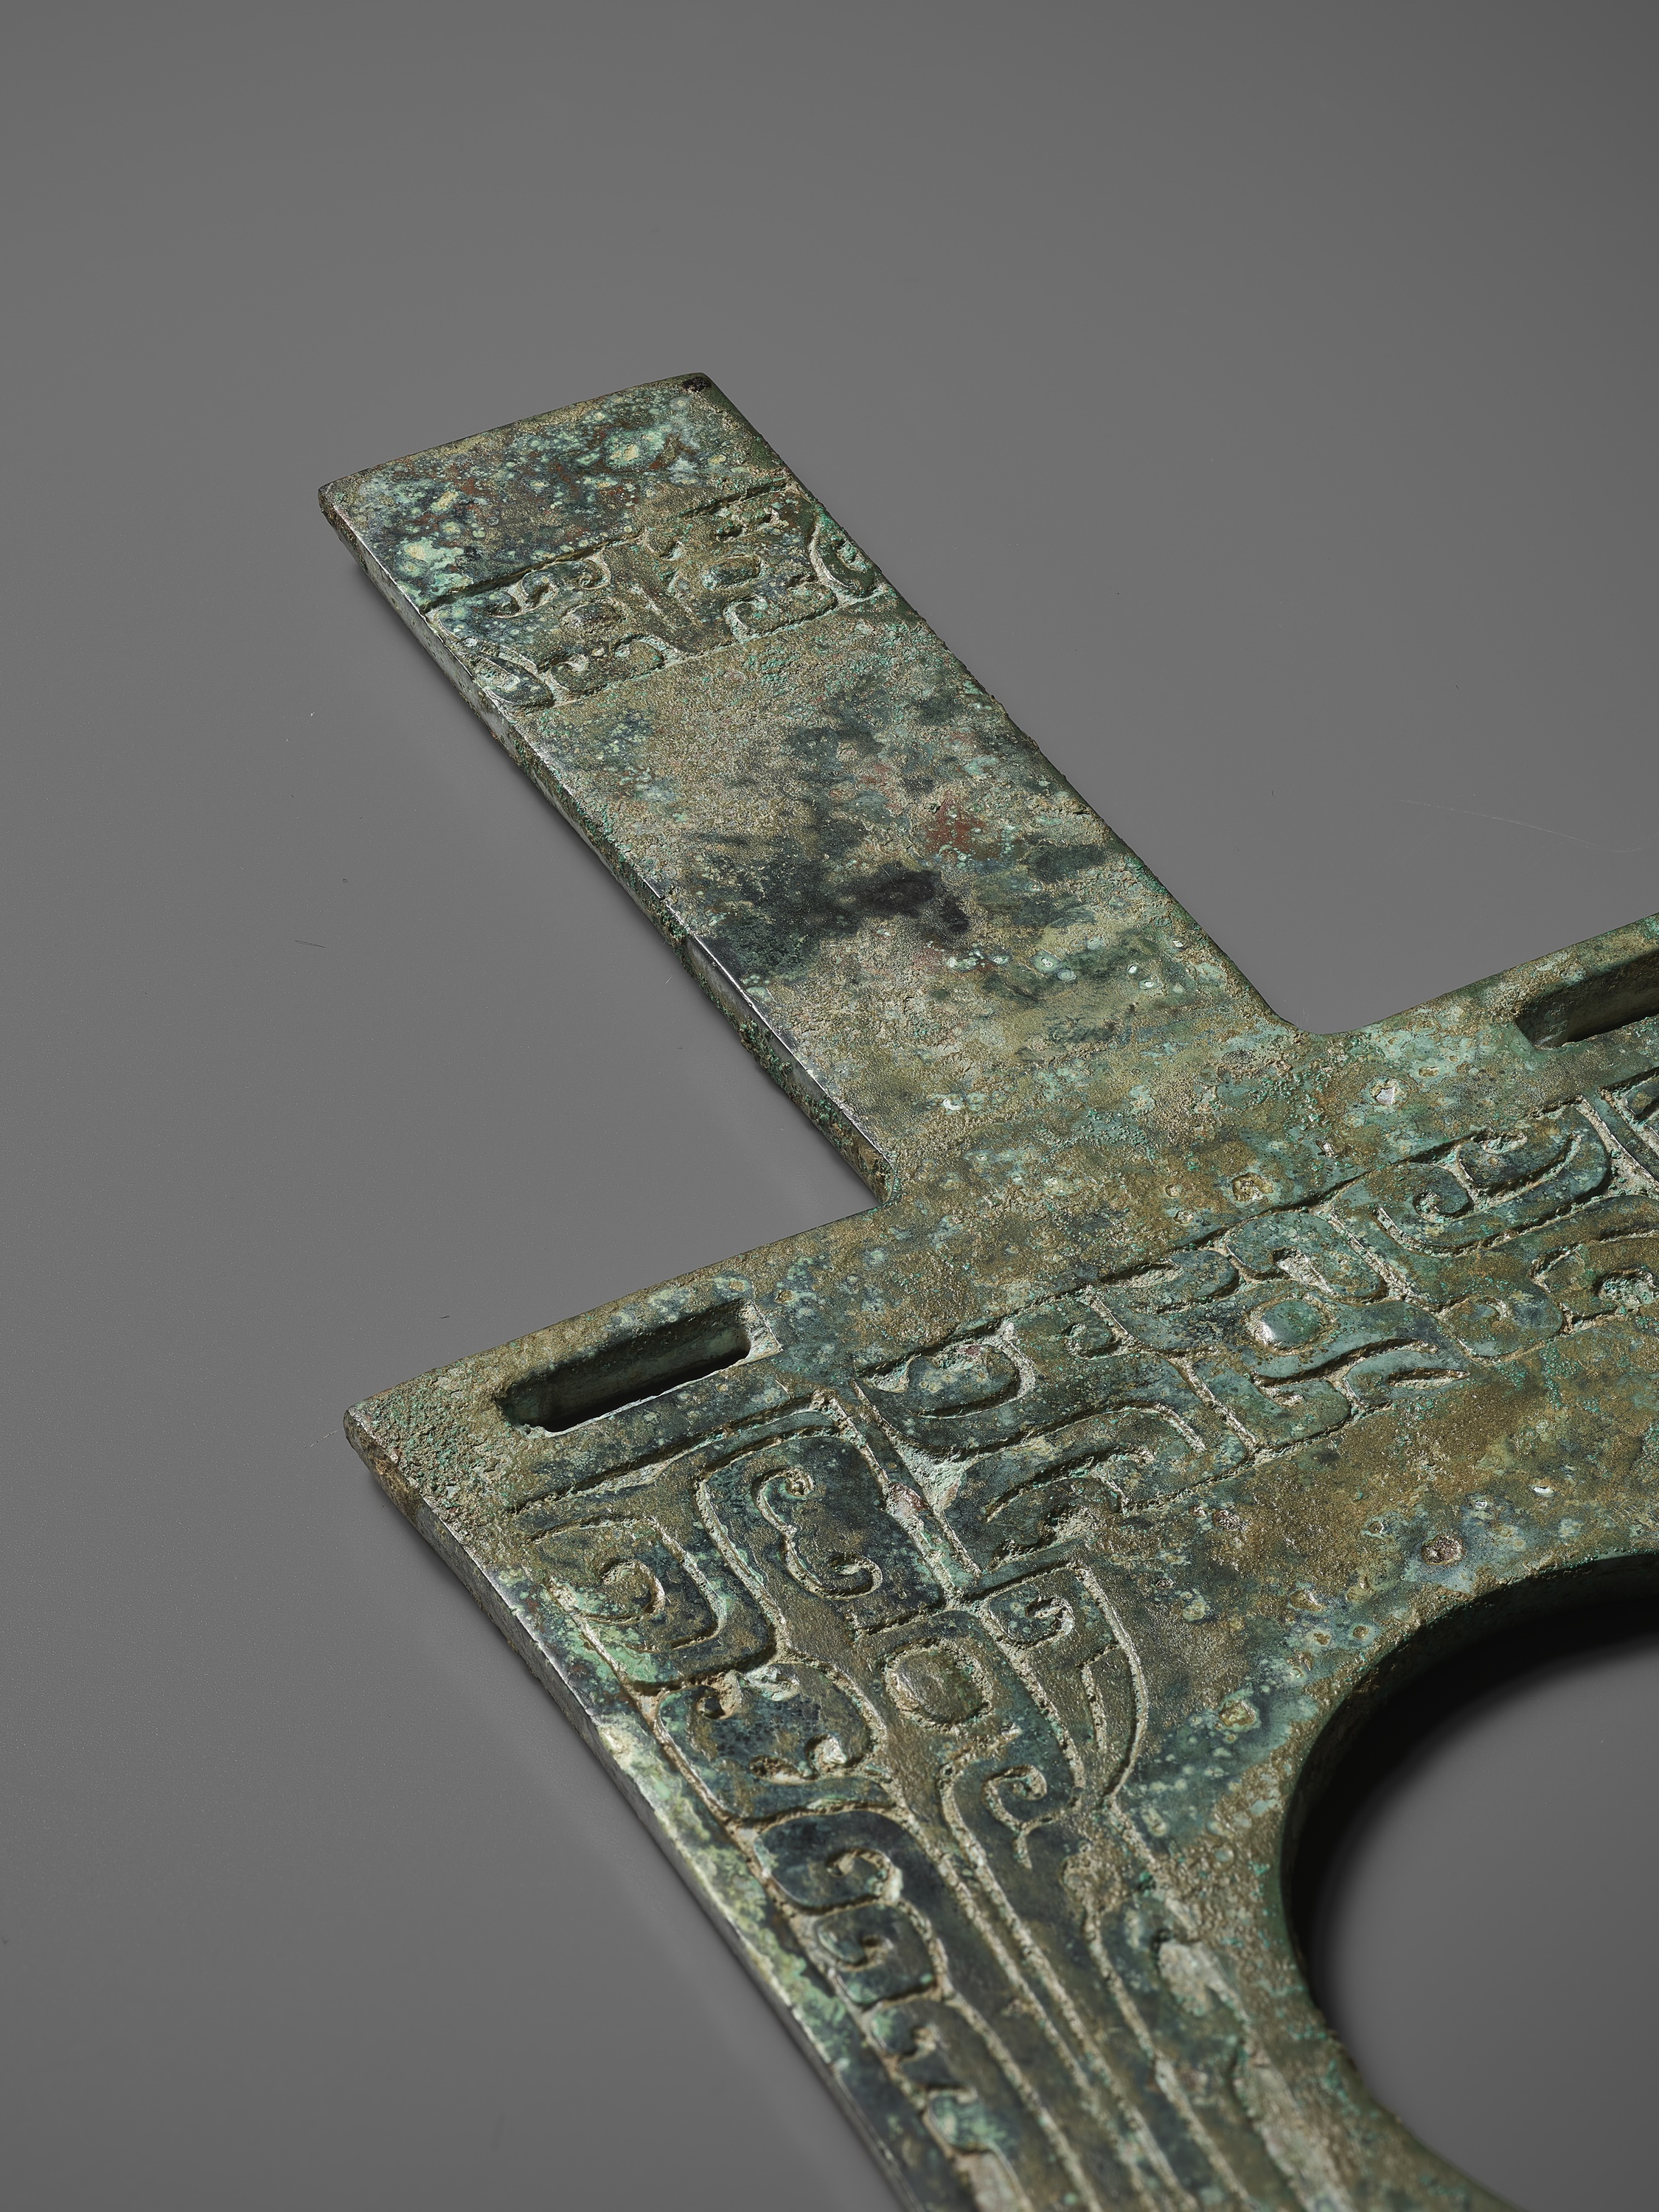 A RARE AND IMPORTANT BRONZE RITUAL AXE-HEAD, YUE, EARLY SHANG DYNASTY, CIRCA 1500-1400 BC - Image 8 of 13